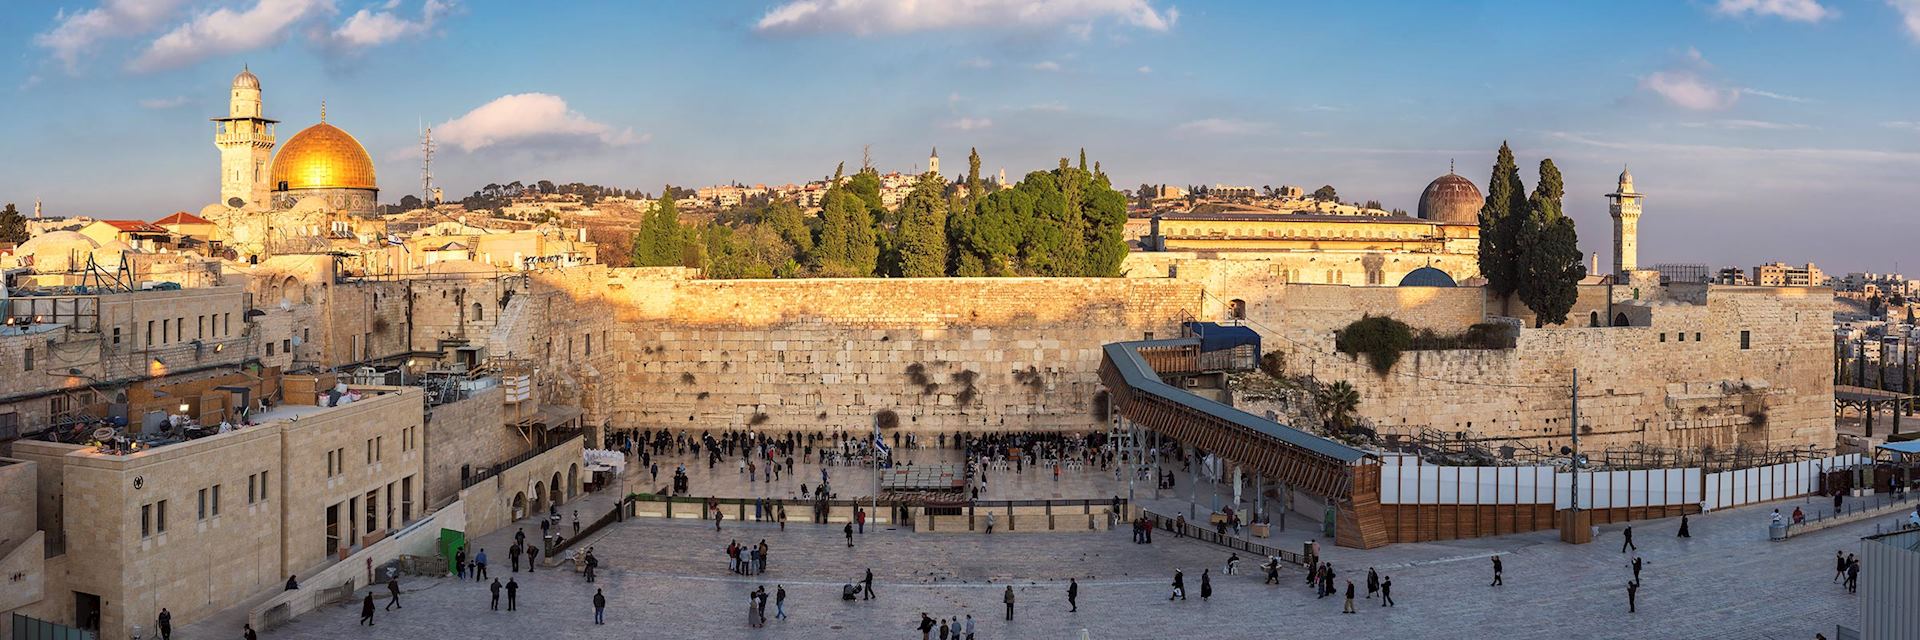 Visit on a trip to Israel | Audley Travel